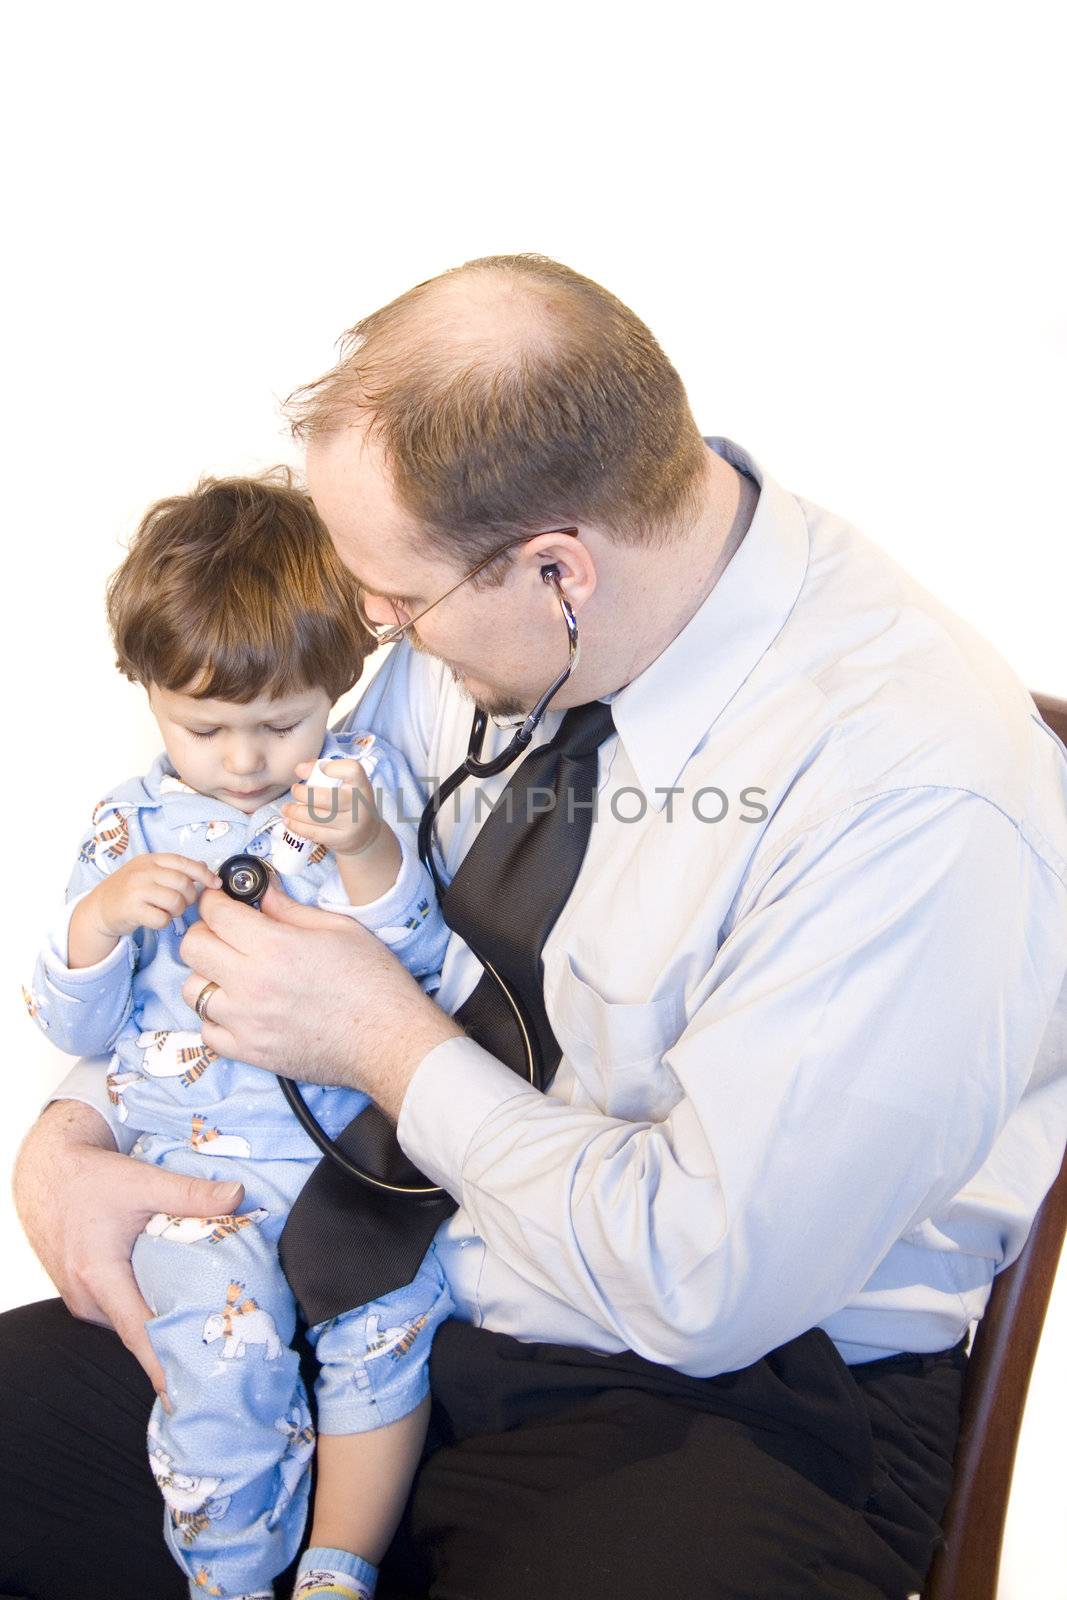 Doctor sitting with young child giving checkup